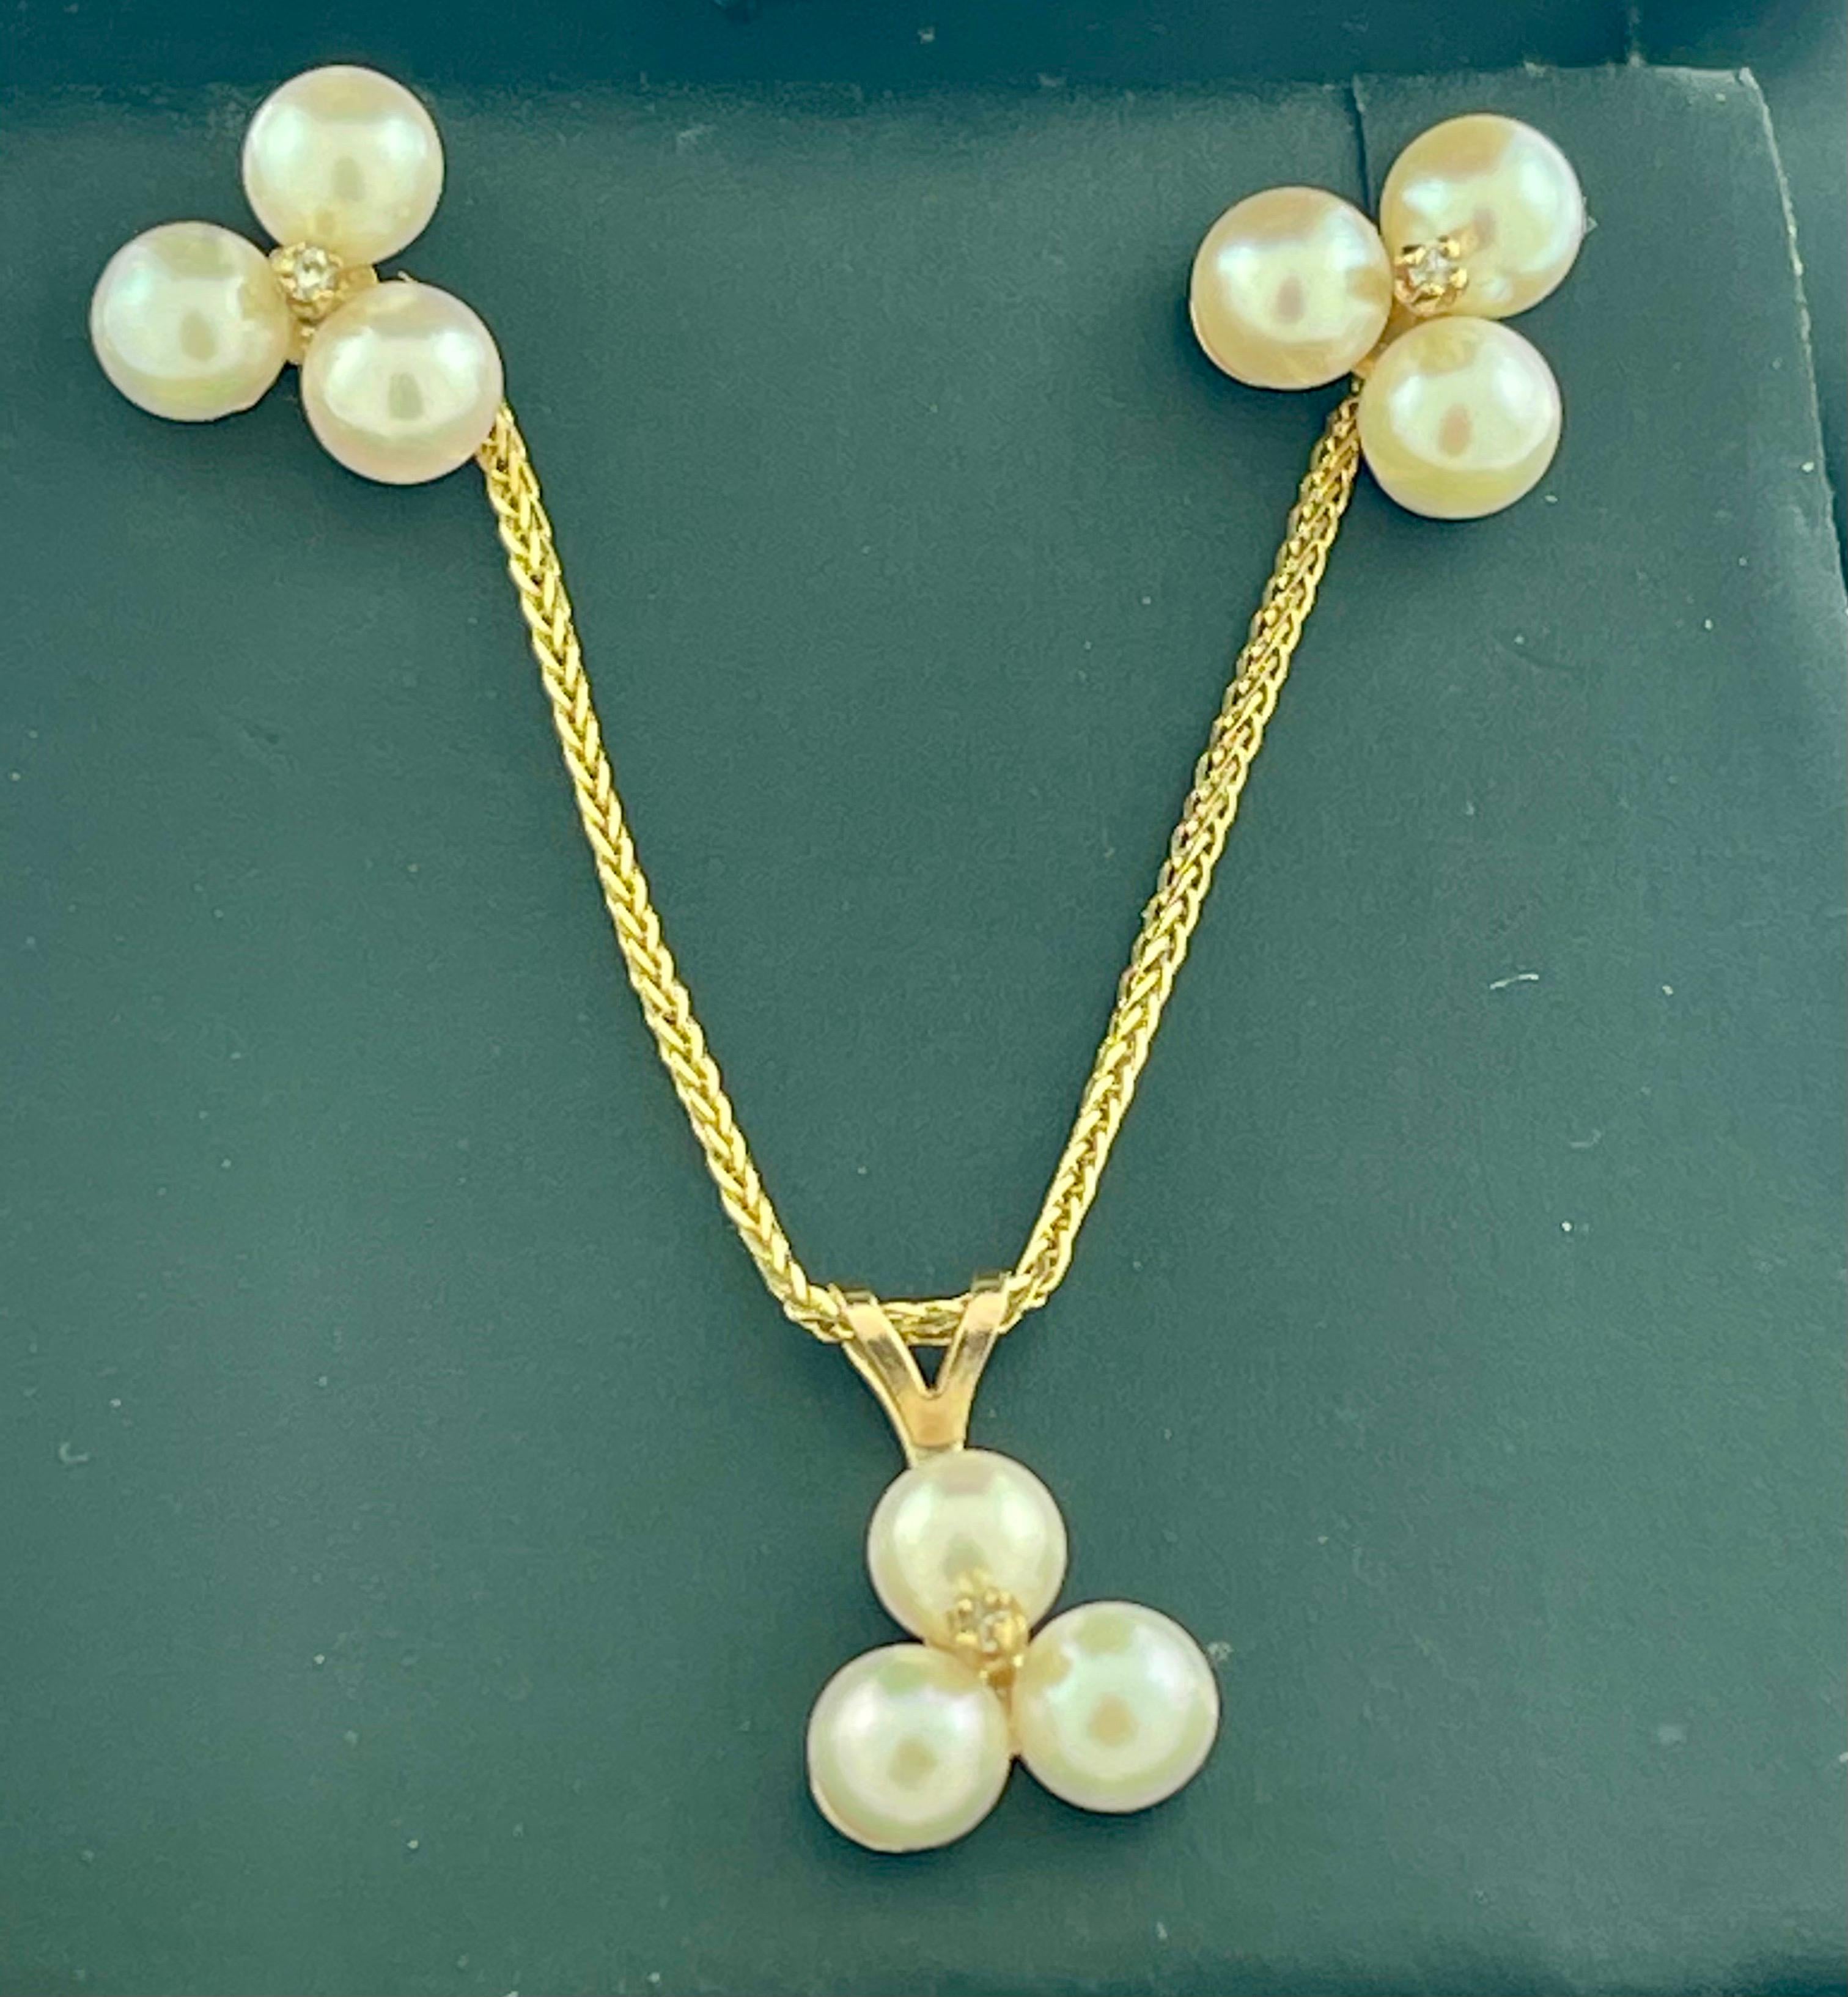 Tripod Pearl Earring with Matching Pendant & 14 Karat Yellow Gold Chain Set For Sale 3